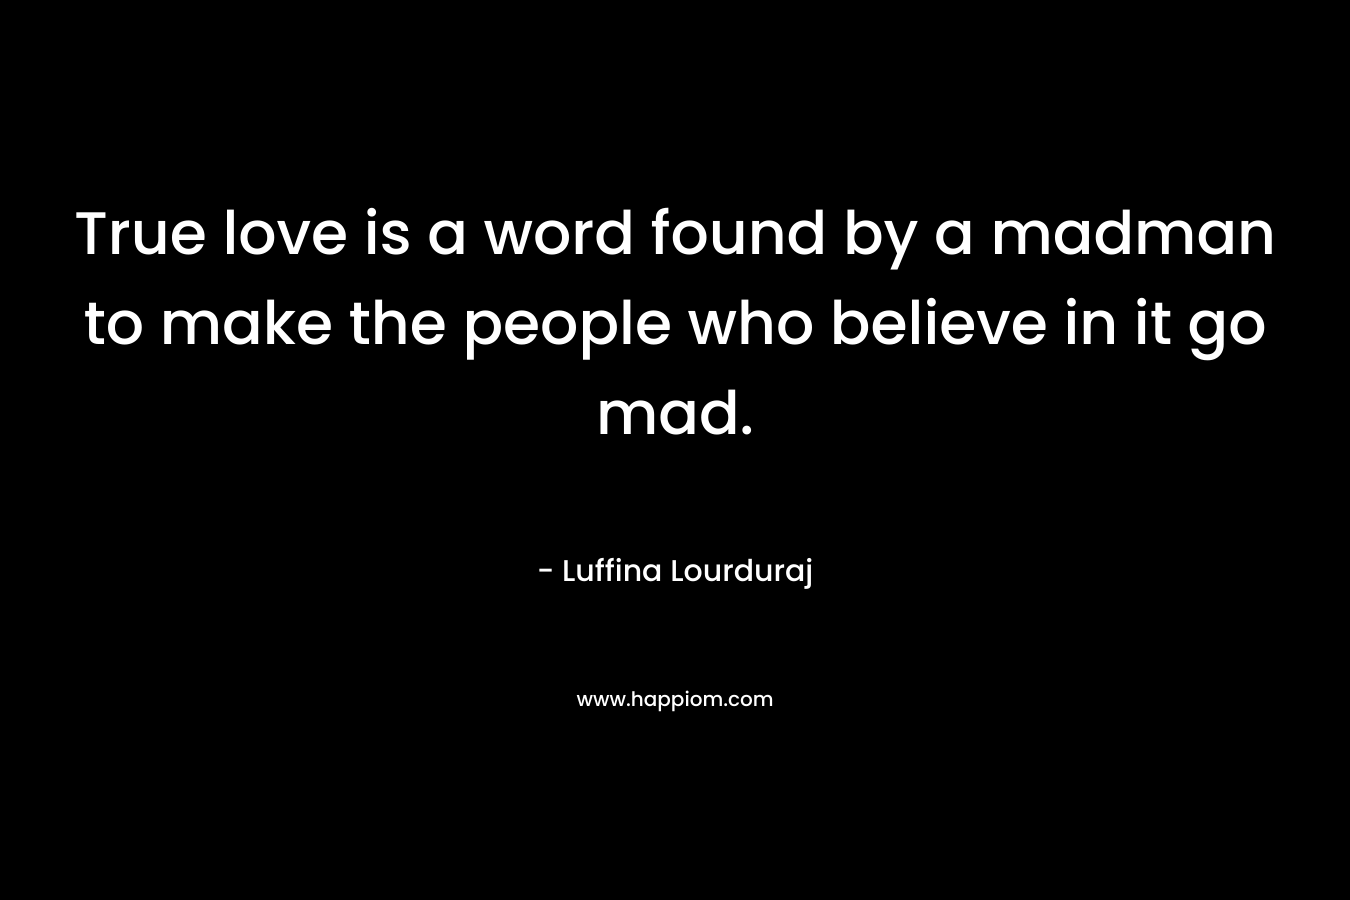 True love is a word found by a madman to make the people who believe in it go mad.